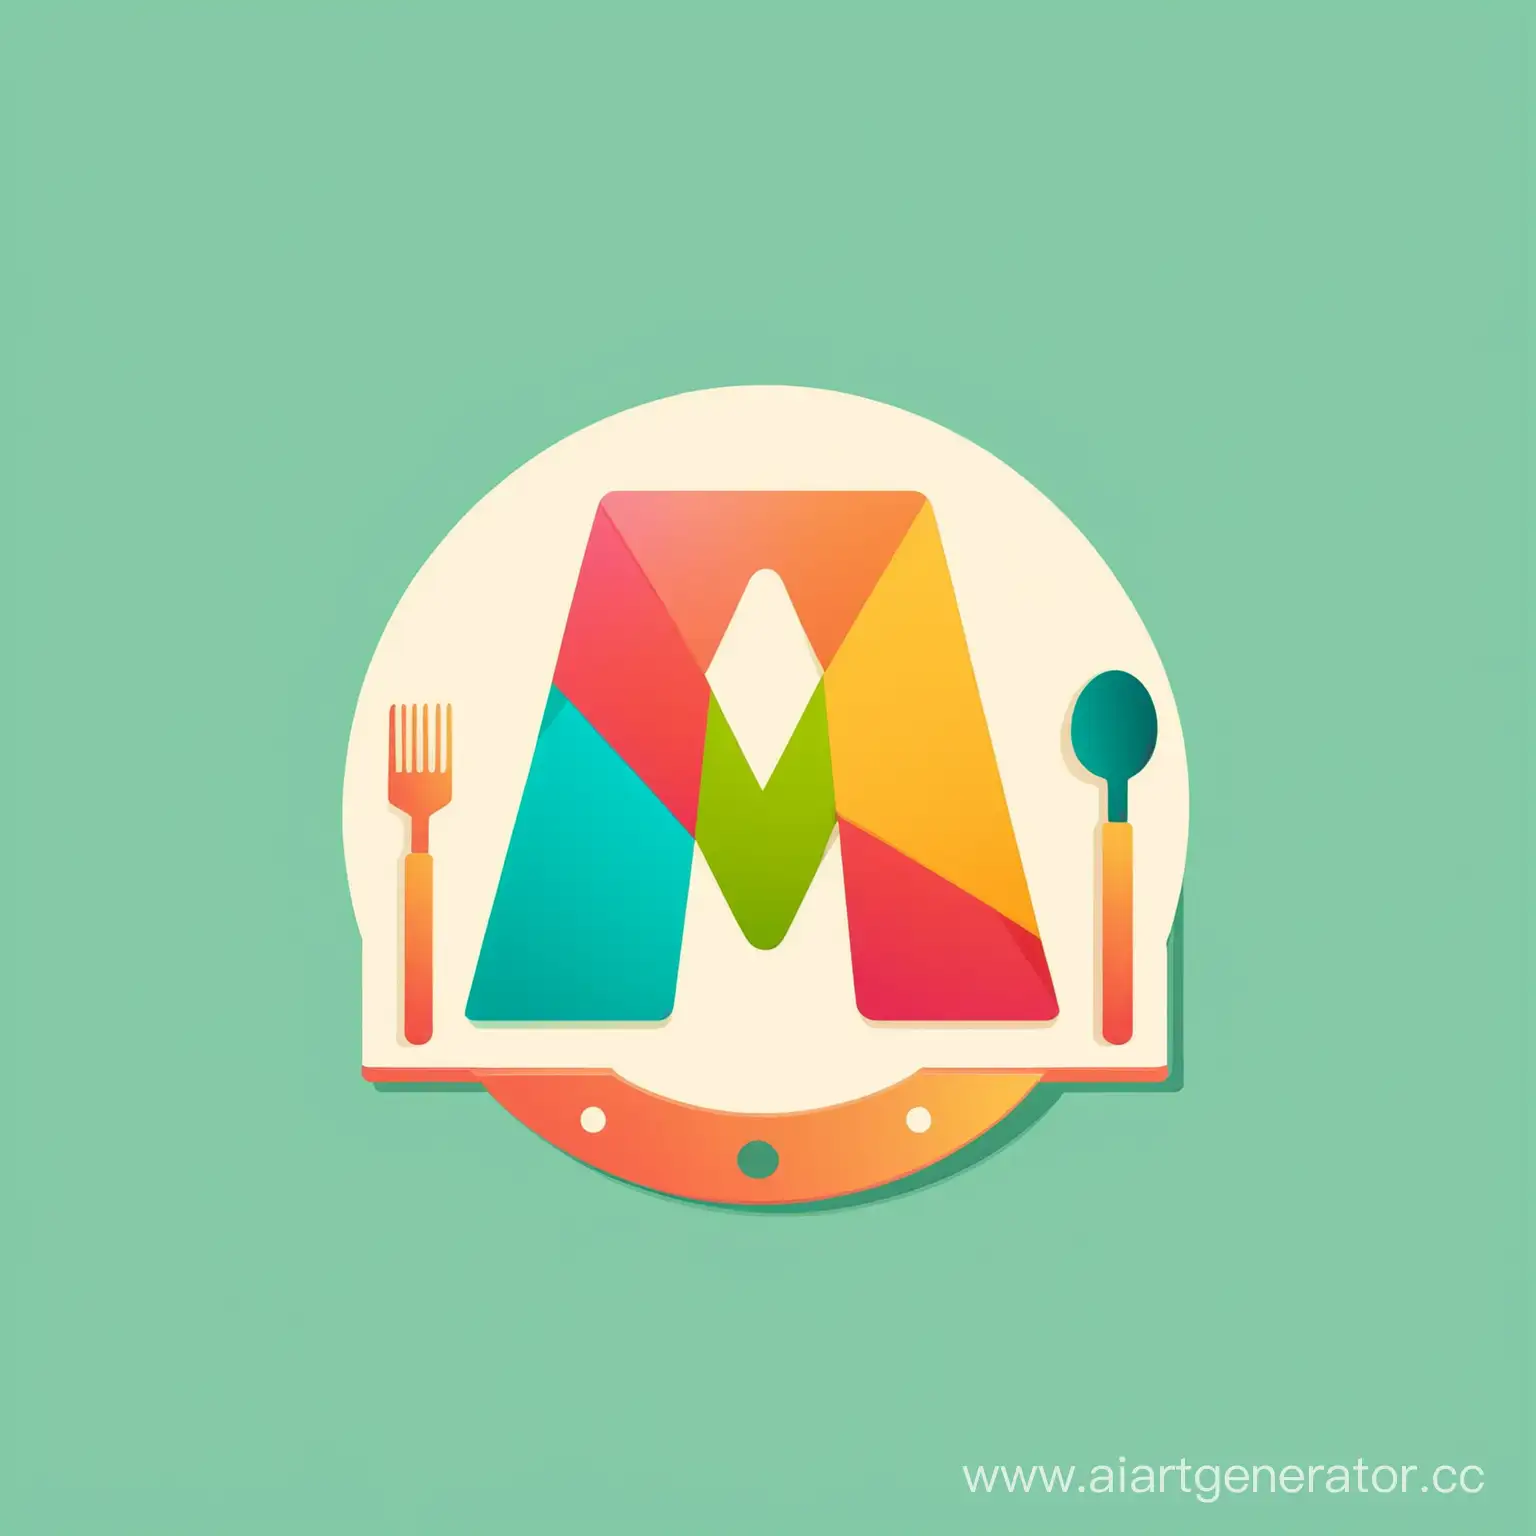 Logo of a letter M with Kitchen Assessories. Simple Vector graphics colorful